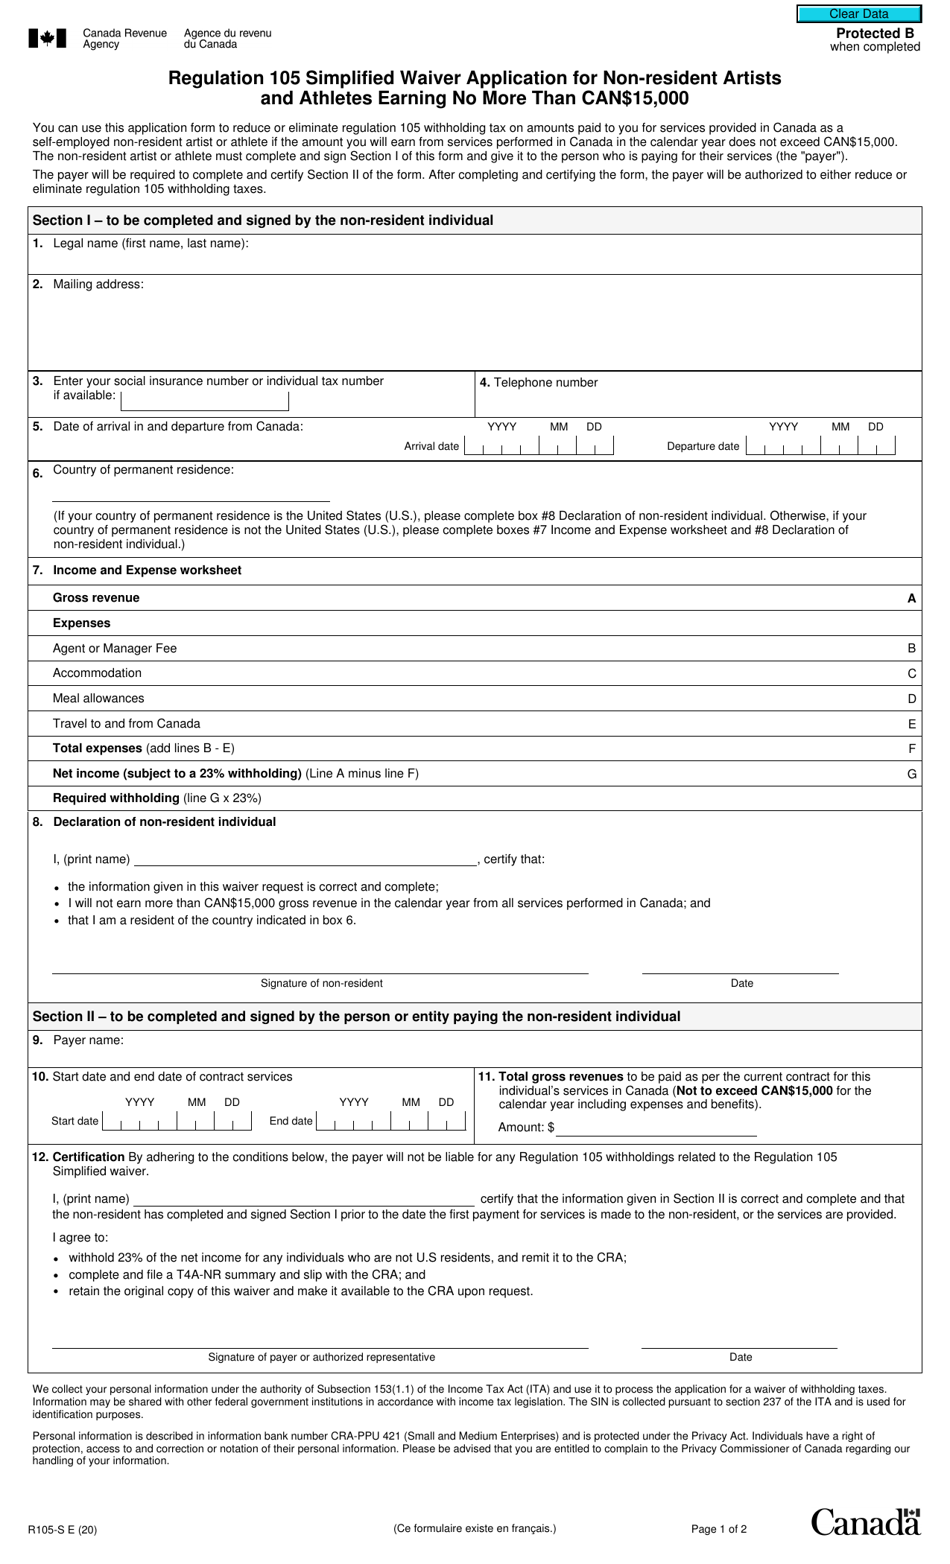 Form R105-S Regulation 105 Simplified Waiver Application for Non-resident Artists and Athletes Earning No More Than Can $15,000 - Canada, Page 1